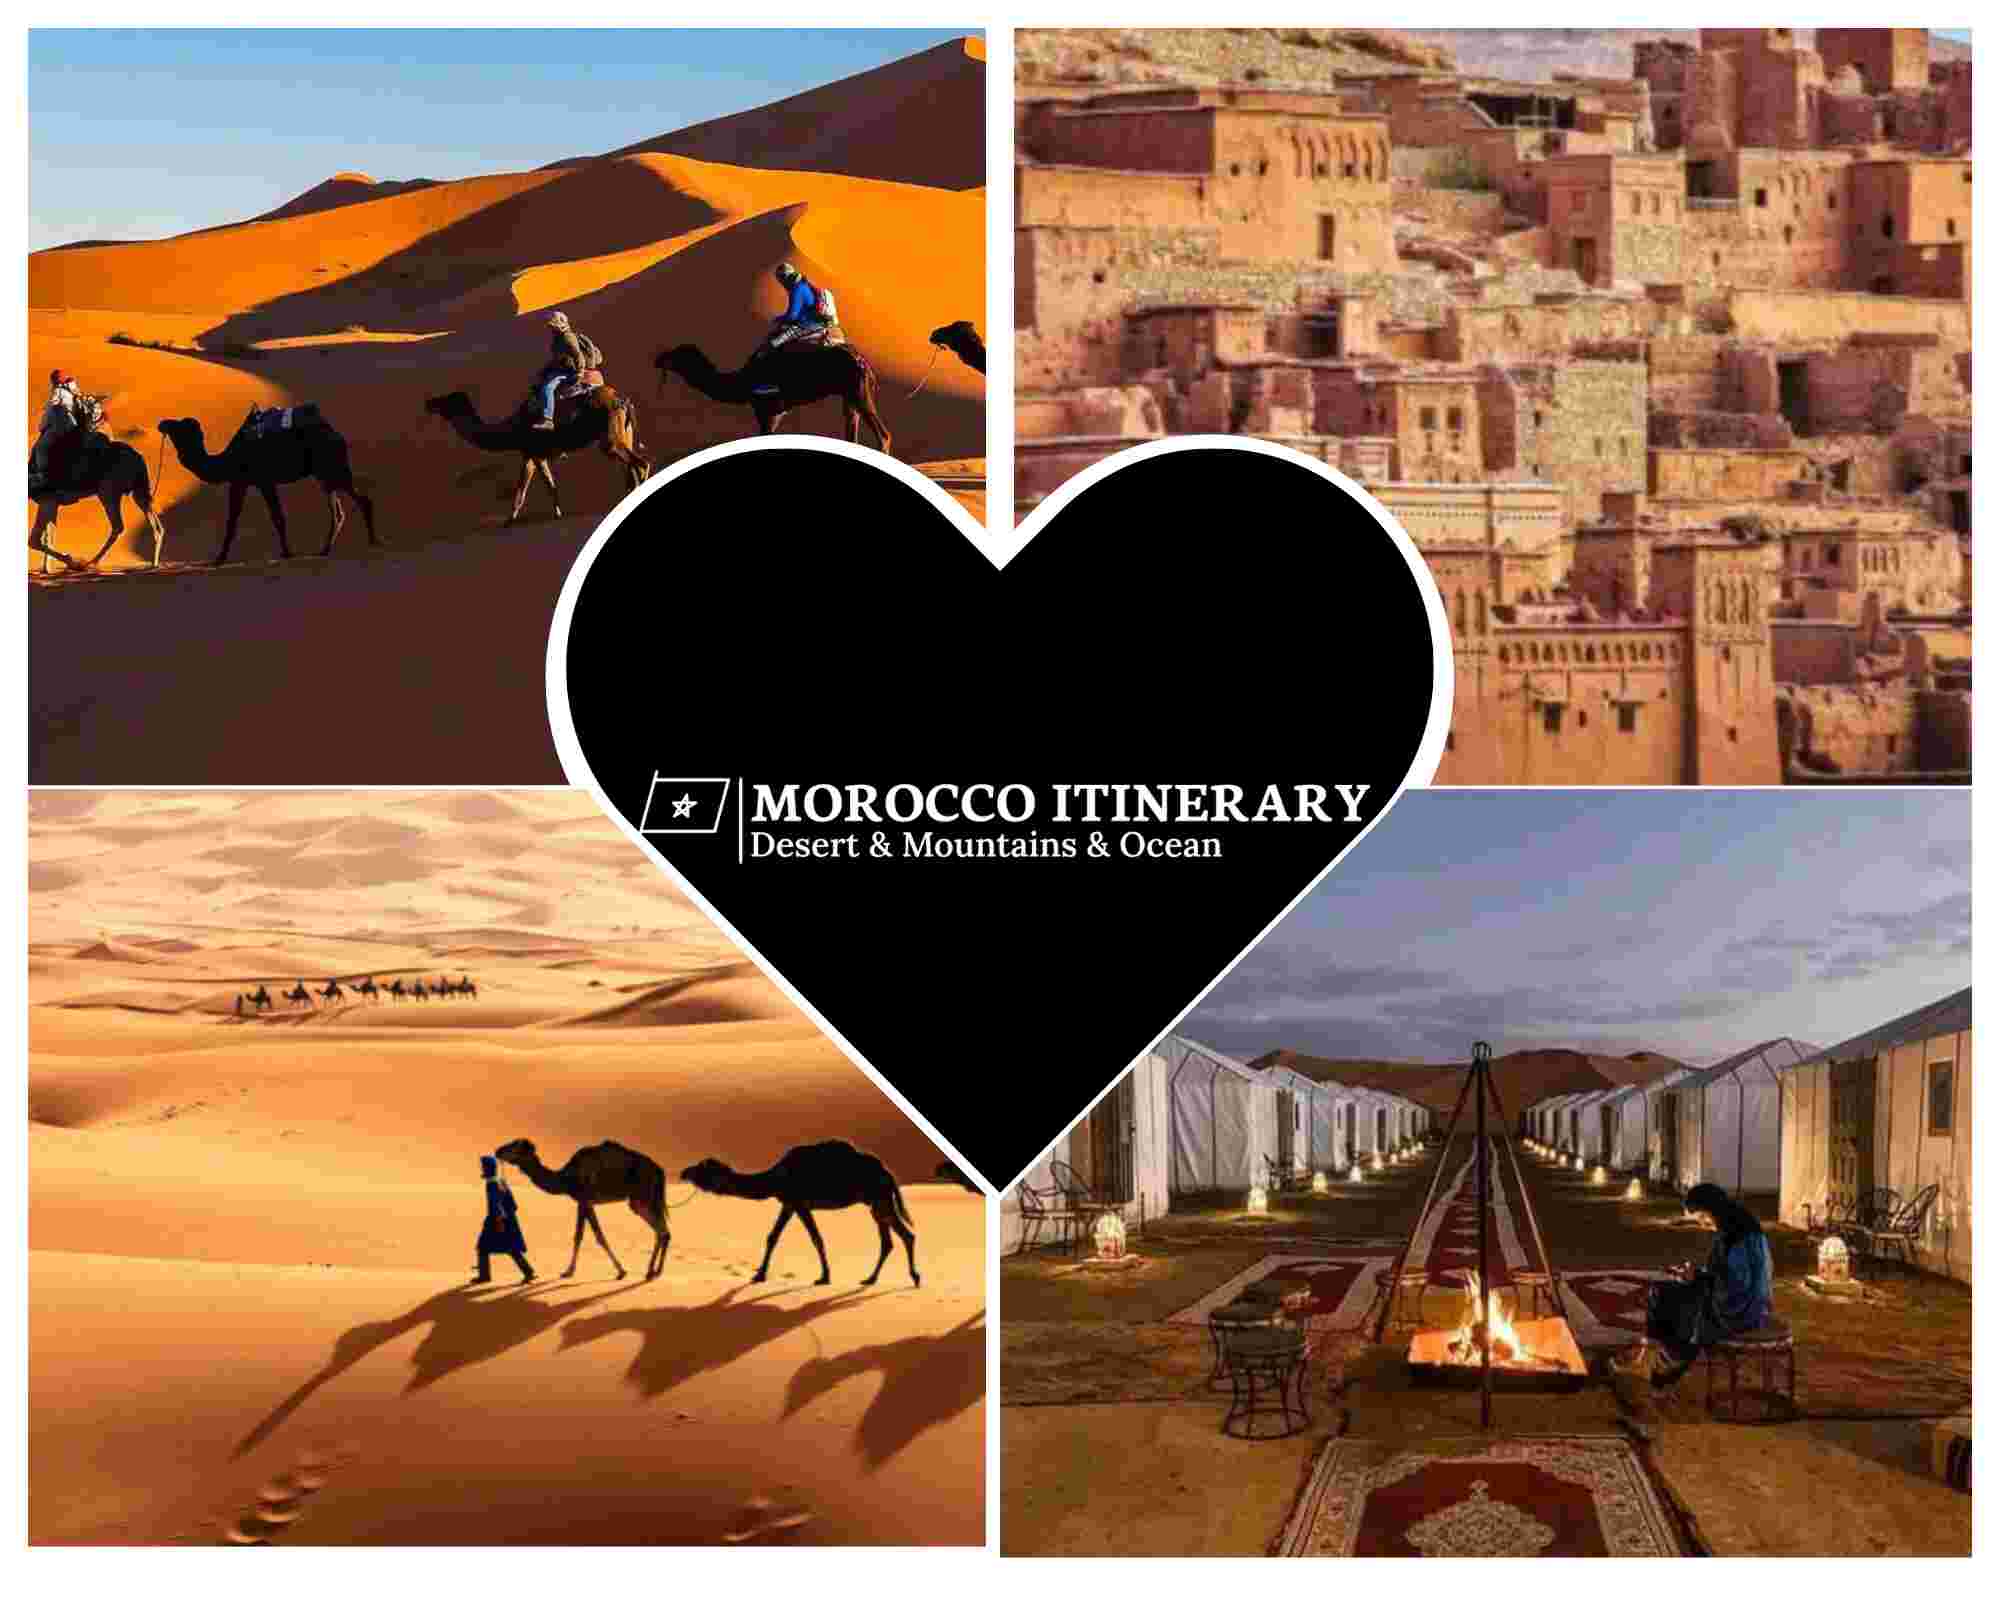 Fes 4 days itinerary, Tour from Fes to Marrakech 4 days, Morocco tour 4 days from Fes to Marrakech via desert, 4 days 3 nights in Morocco, 4 Days Morocco desert tour, 4 Days in Morocco, 4 Days Morocco Desert trip, 4 Days from Fes to Marrakech, Fes to Marrakech desert tour 4 Days, 4 Days in Morocco tour